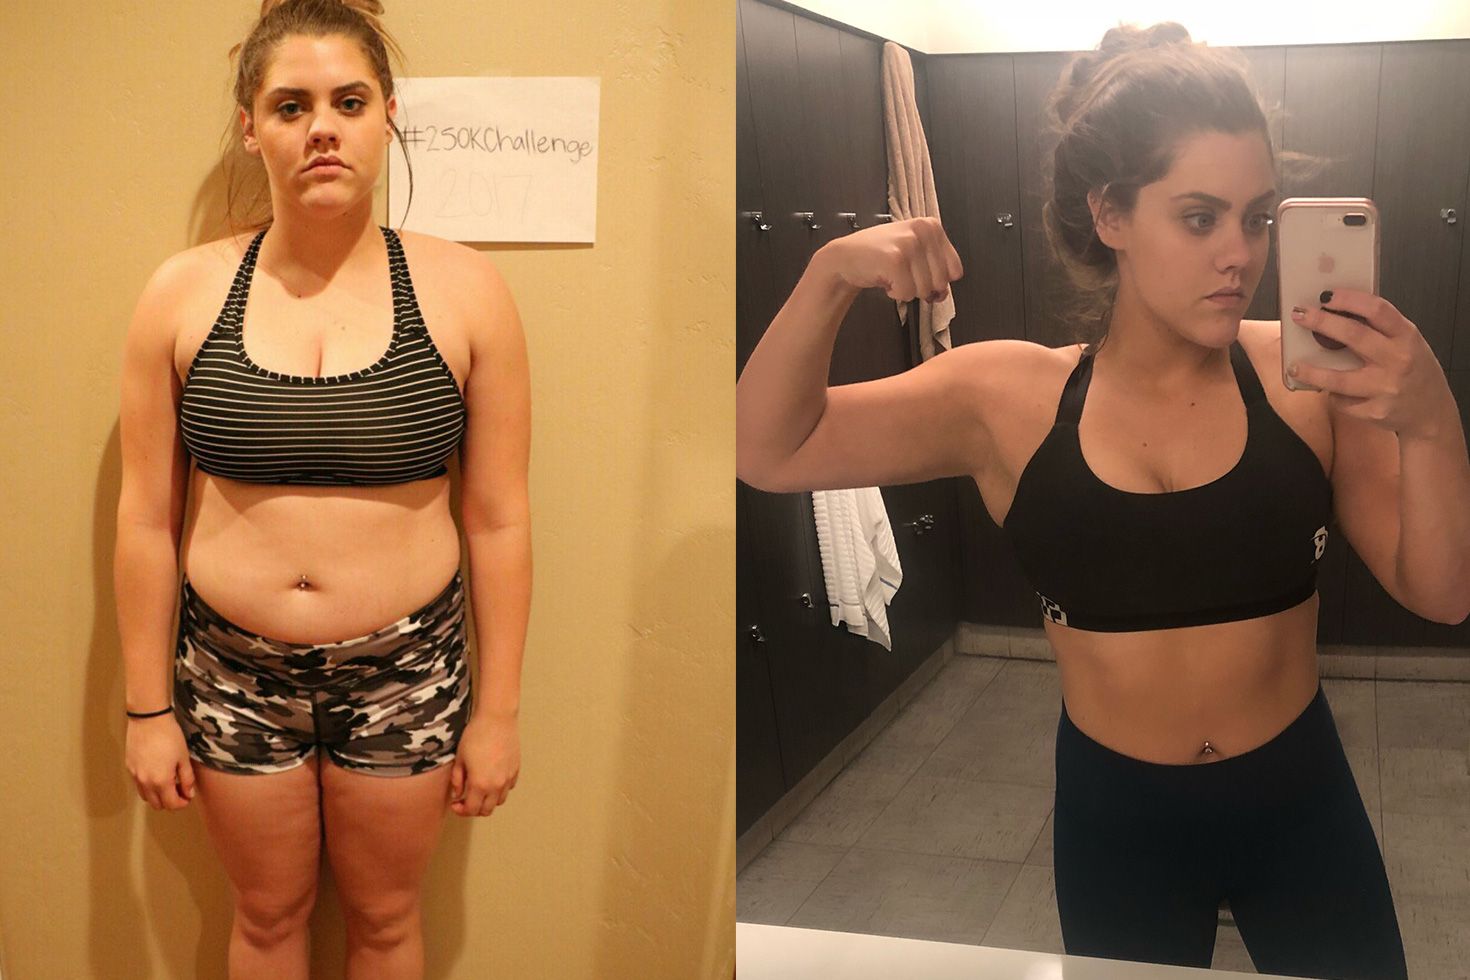 Real Women Keto Diet Success Stories - Advice From Women Who've